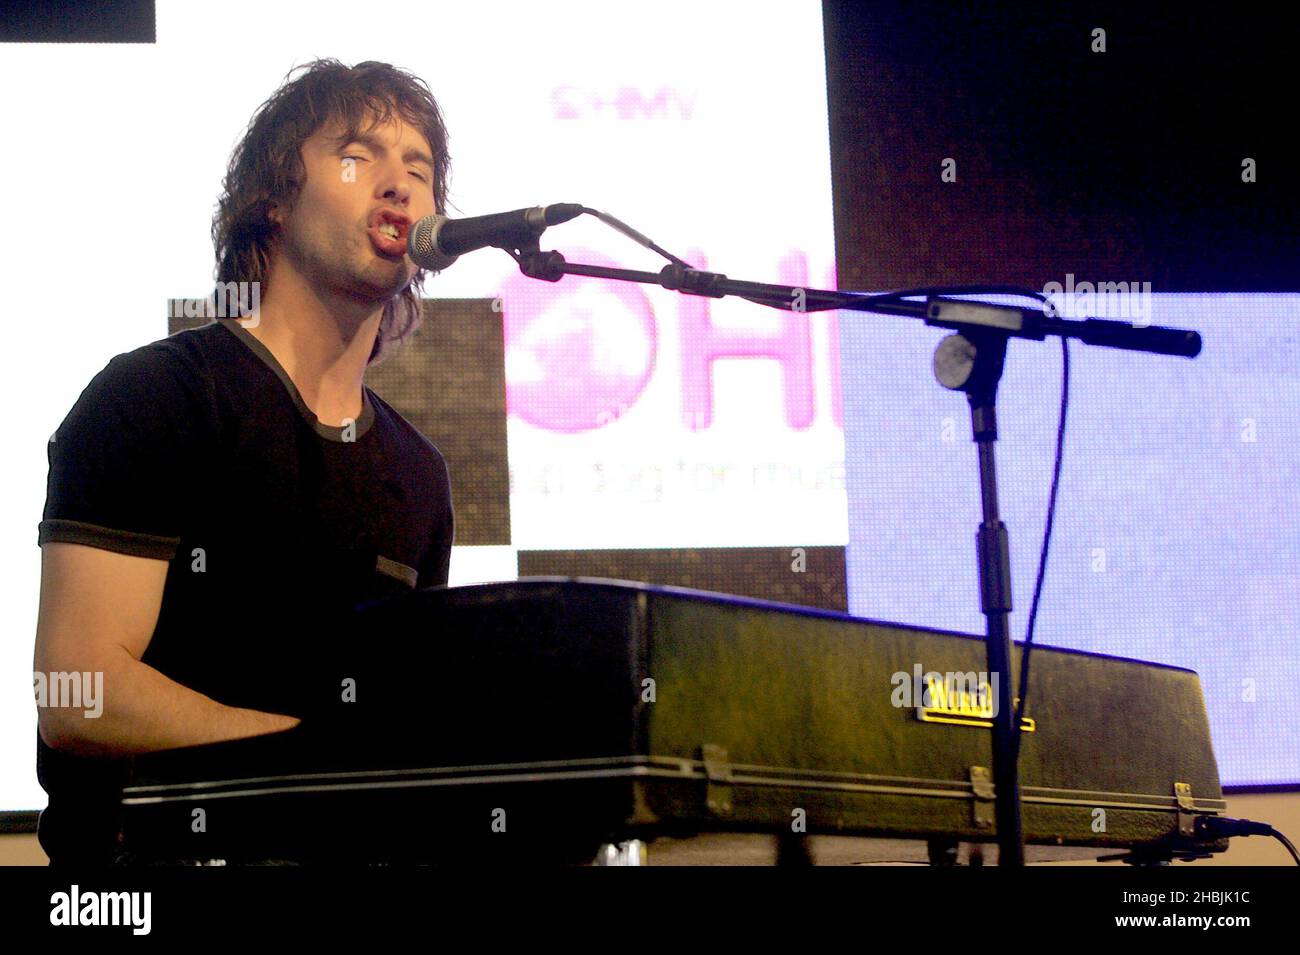 James Blunt Hotly tipped Brit singer-songwriter performs live and signs copies of latest single, You're Beautiful,at HMV Oxford Street in London. Stock Photo